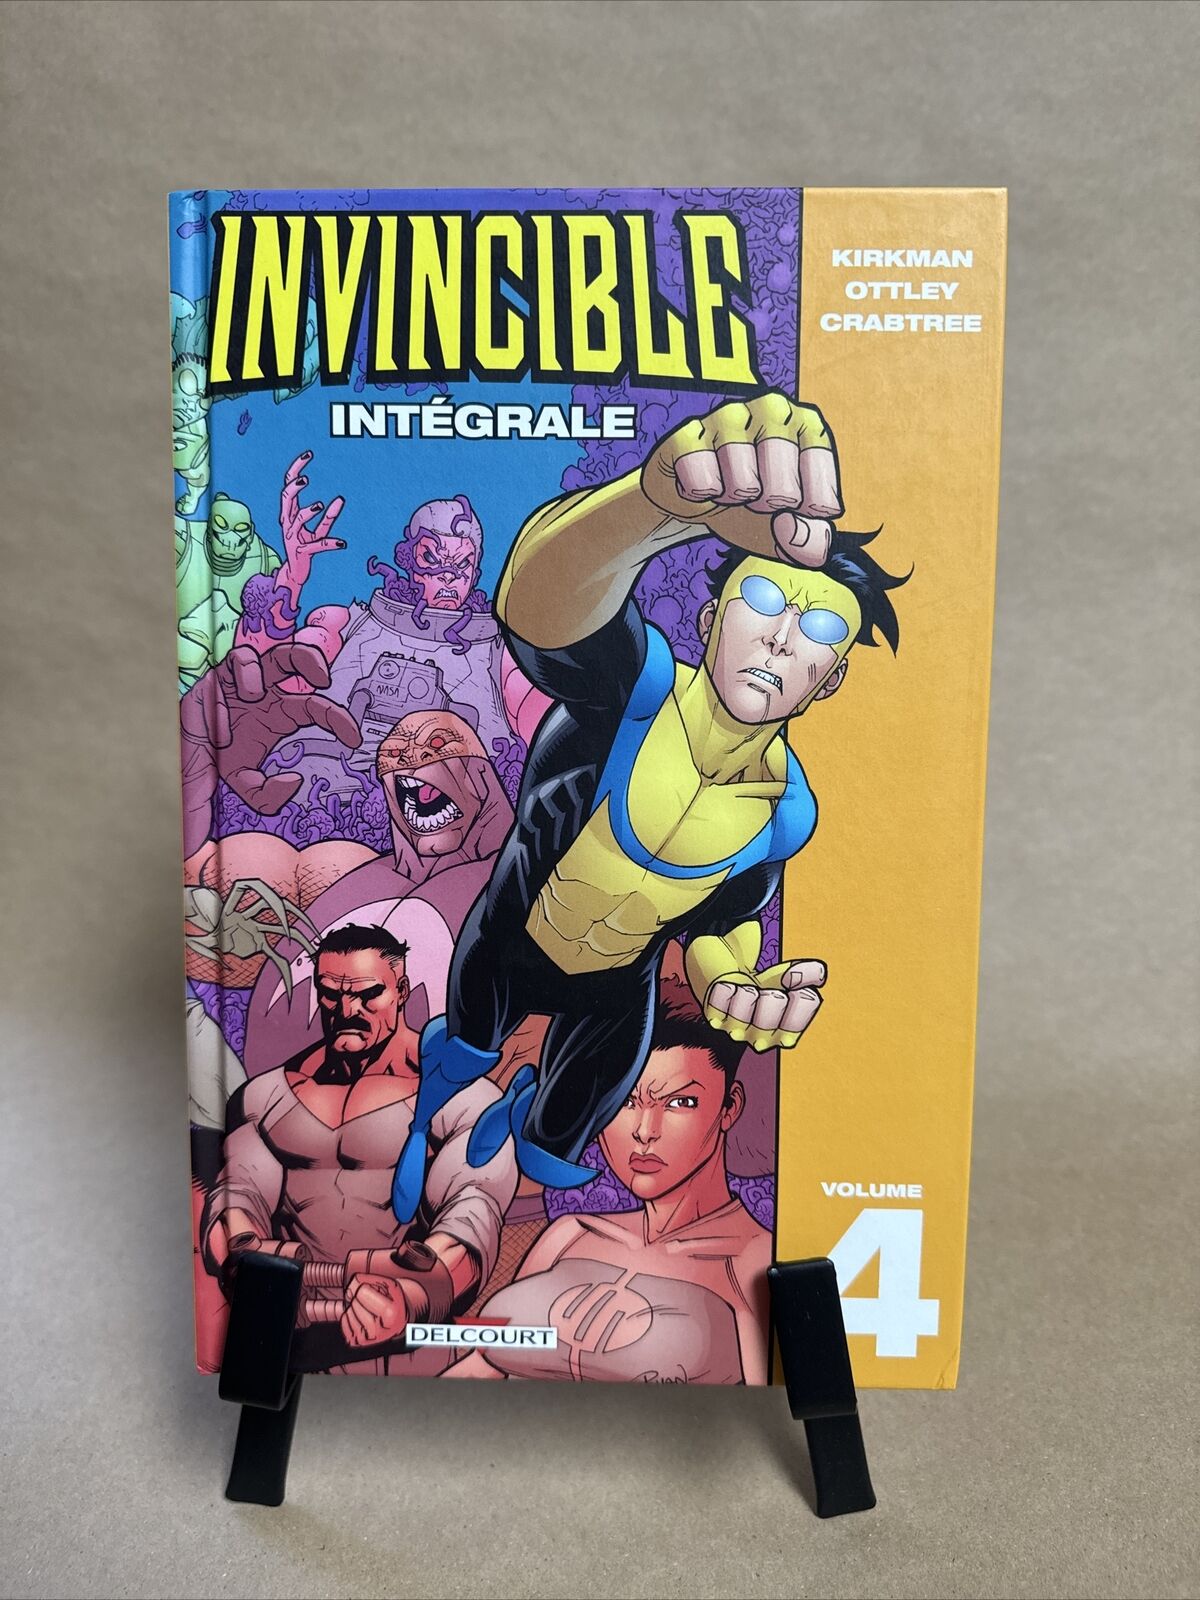 Invincible: the Ultimate Collection #4 (Delcourt, French Language, 2008)